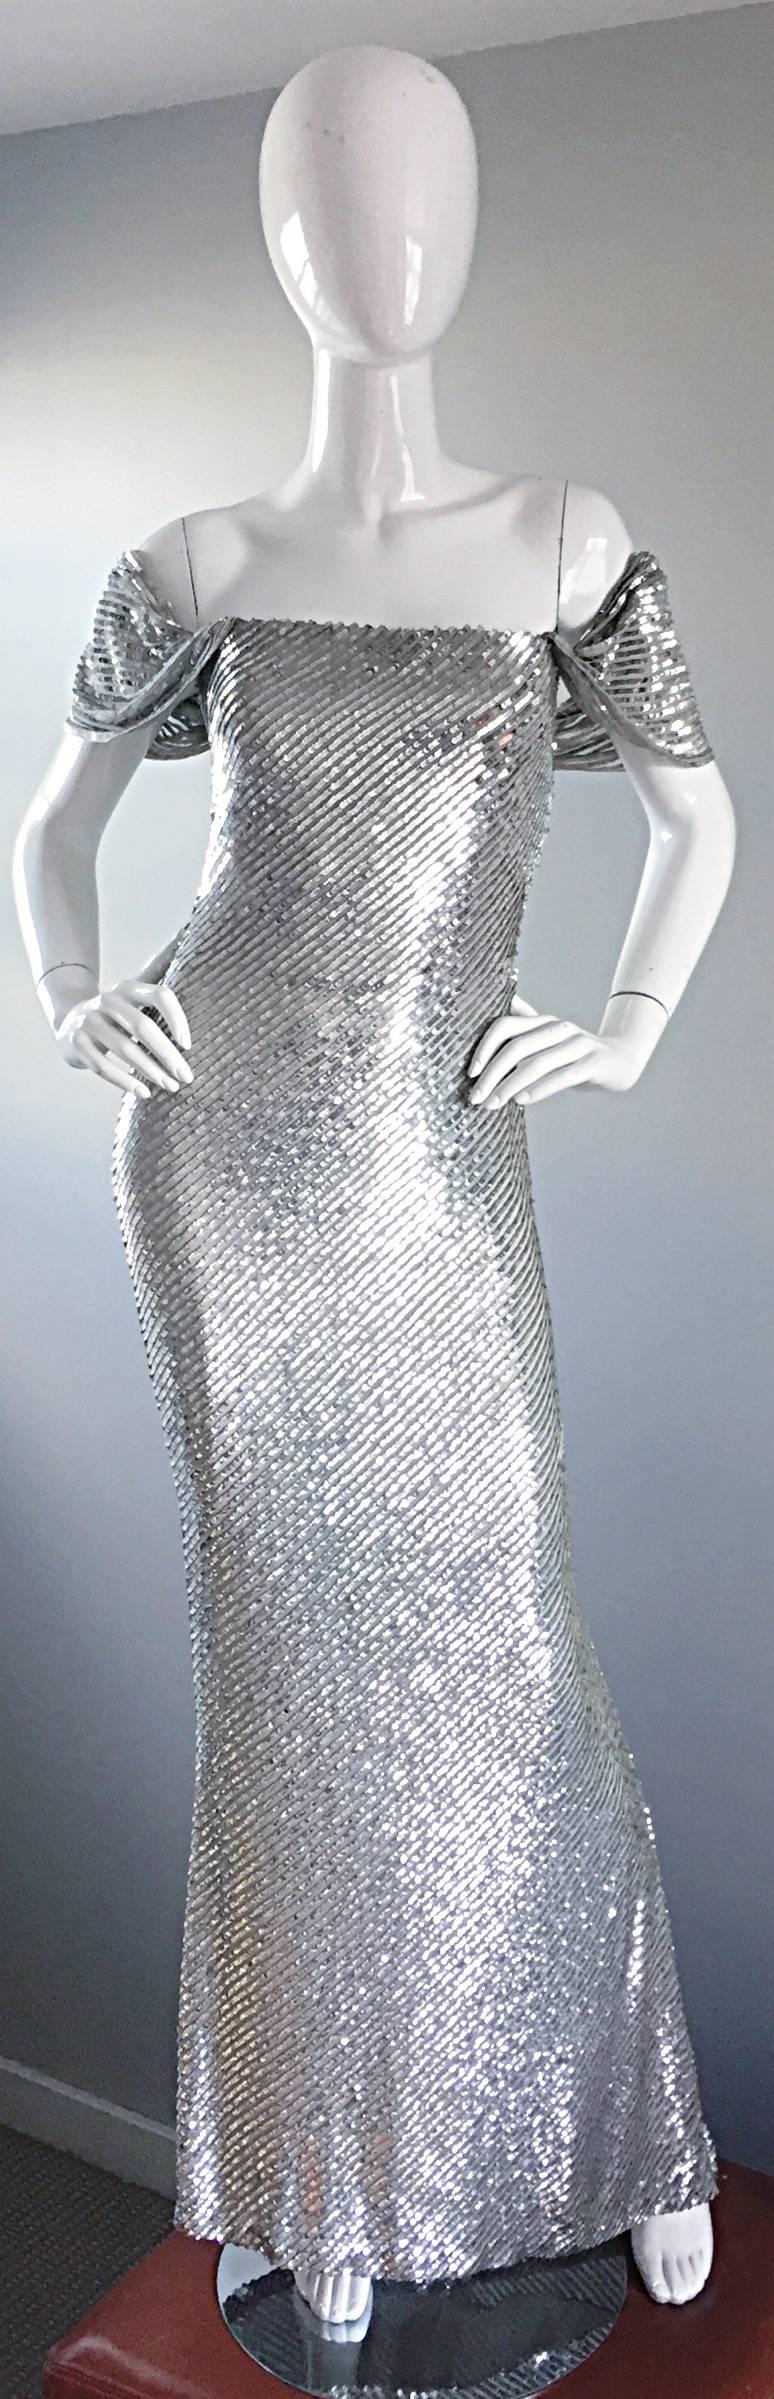 Spectacular bran new (with original price tag of $7,250) vintage BILL BLASS Couture fully sequined silver evening dress! Would cost well over $15,000 today! Features thousands of hand-sewn silver sequins throughout the entire gown. Interior support